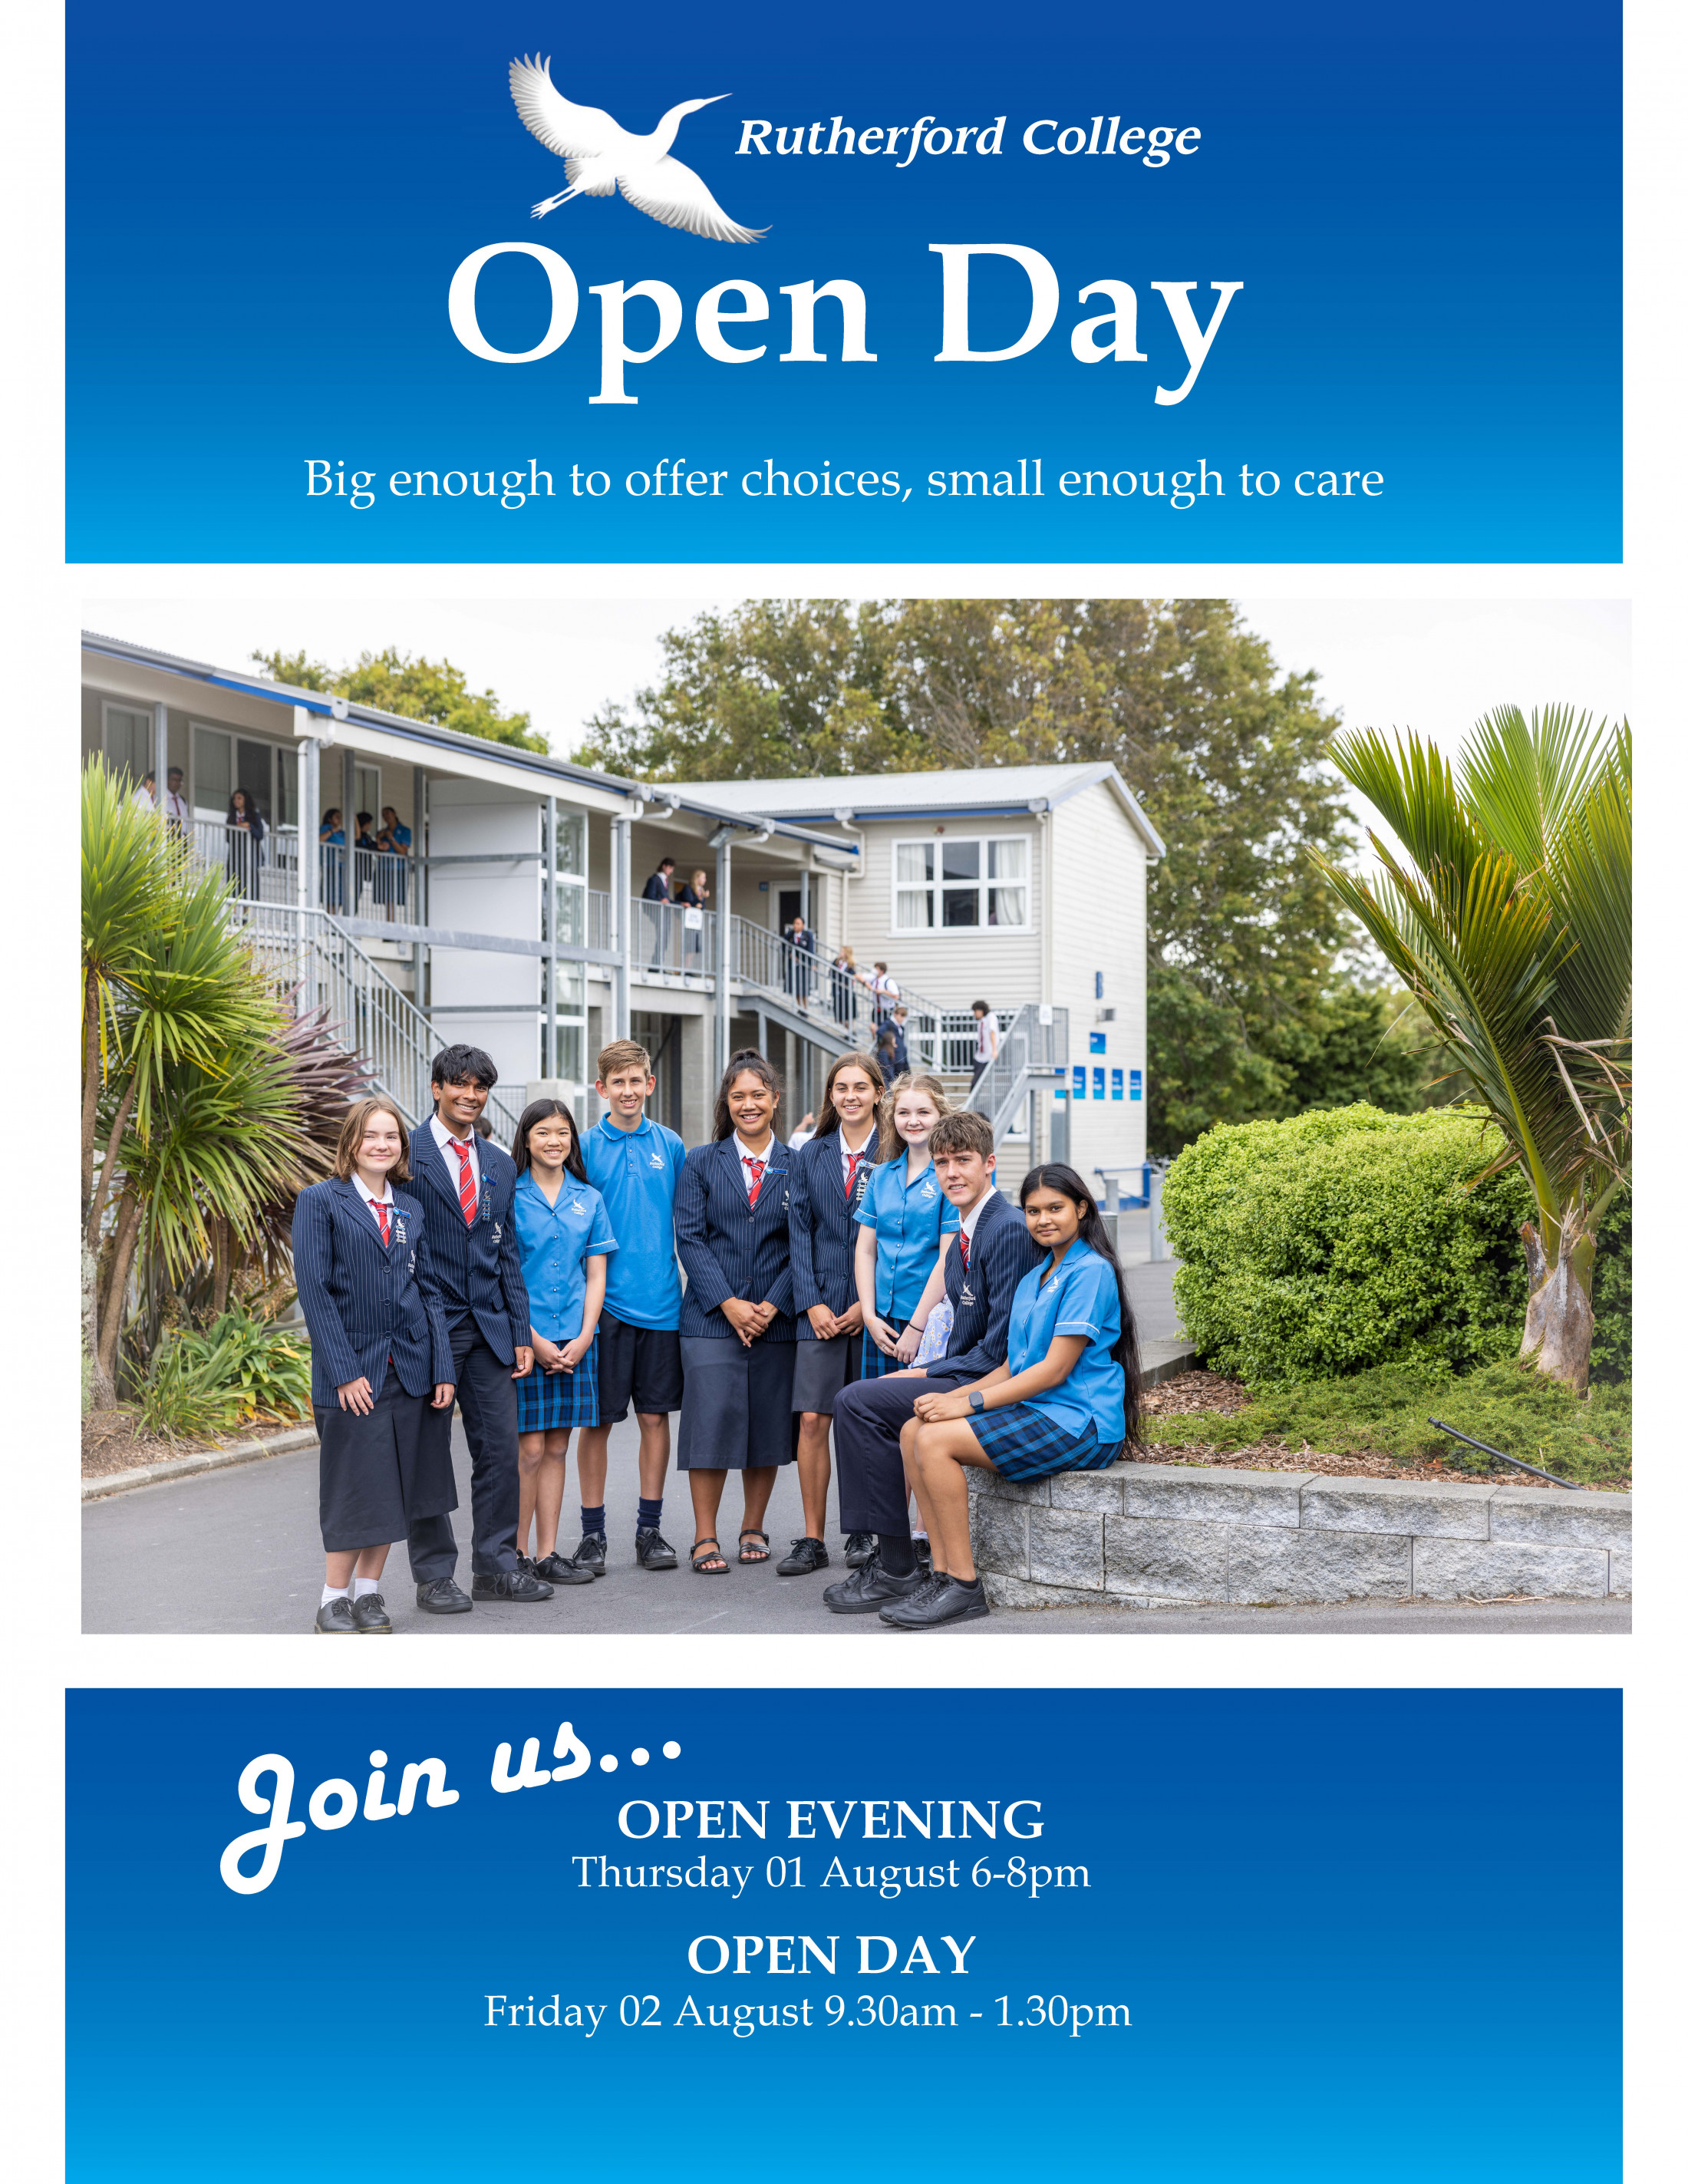 Open Evening and Open Day